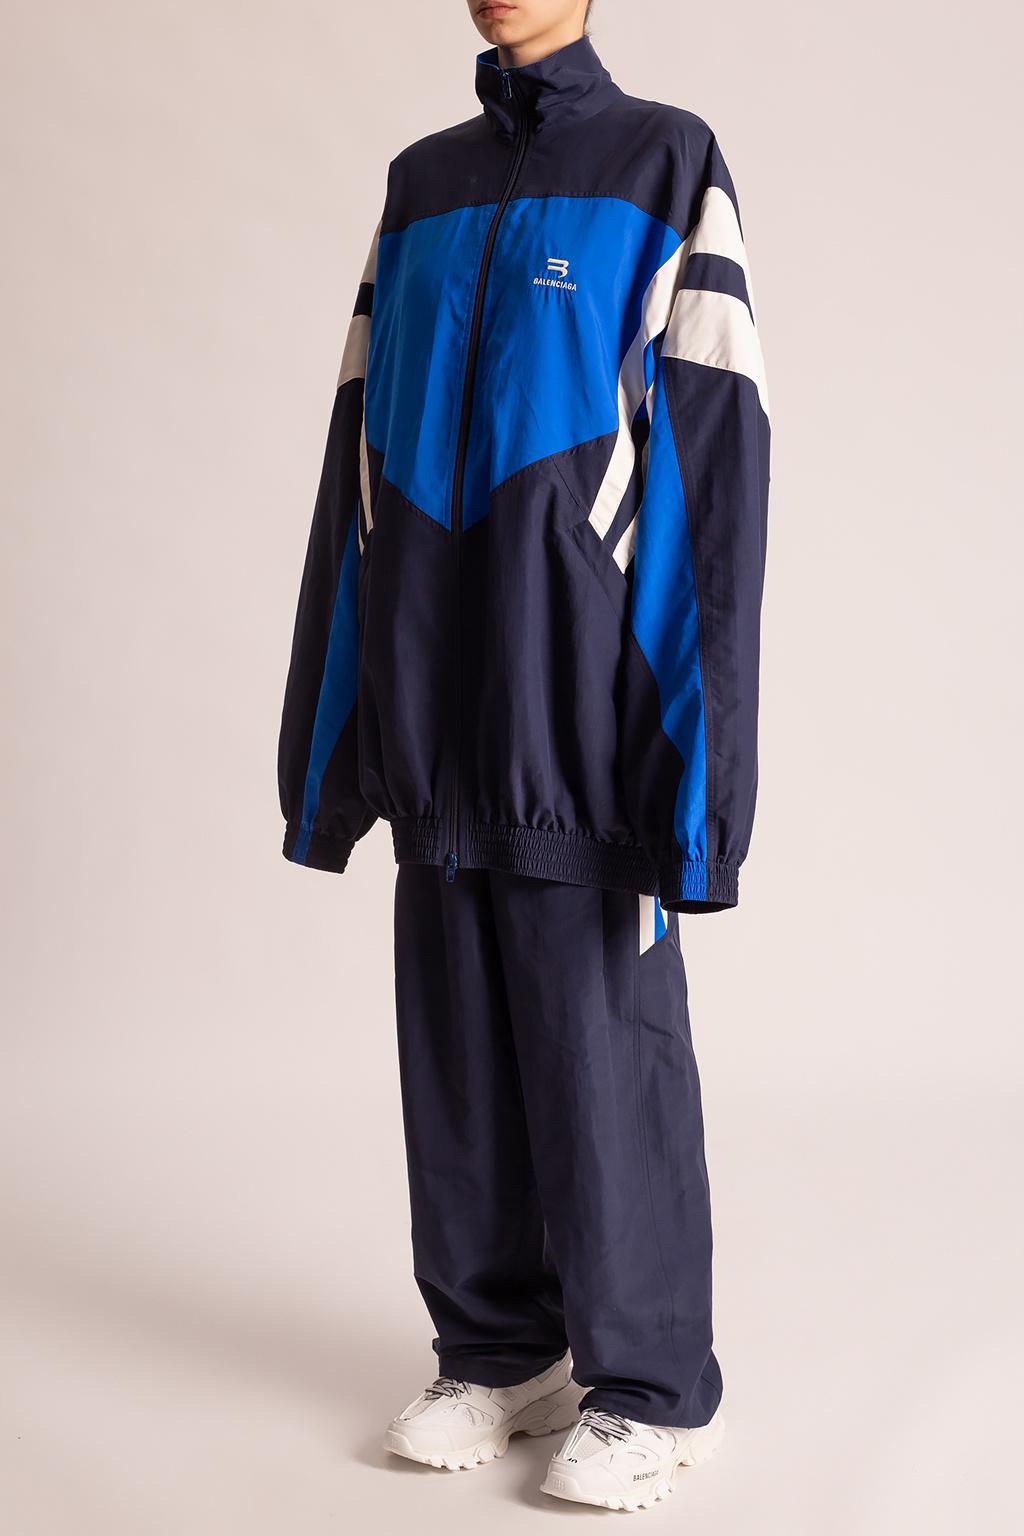 Balenciaga Branded Tracksuit Jacket in Blue | Lyst